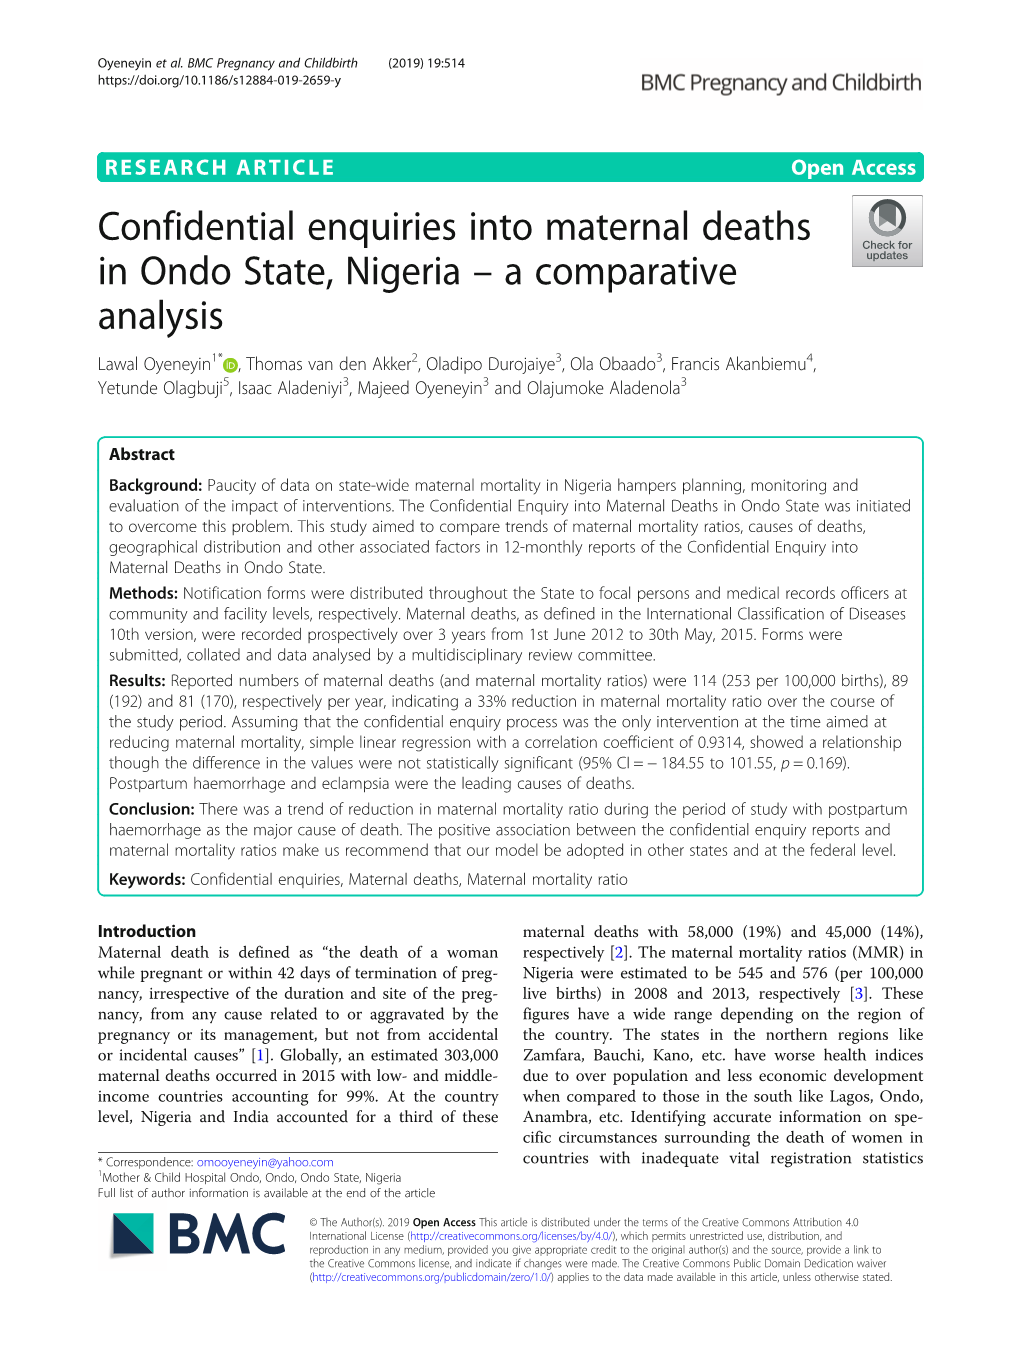 Confidential Enquiries Into Maternal Deaths in Ondo State, Nigeria – a Comparative Analysis